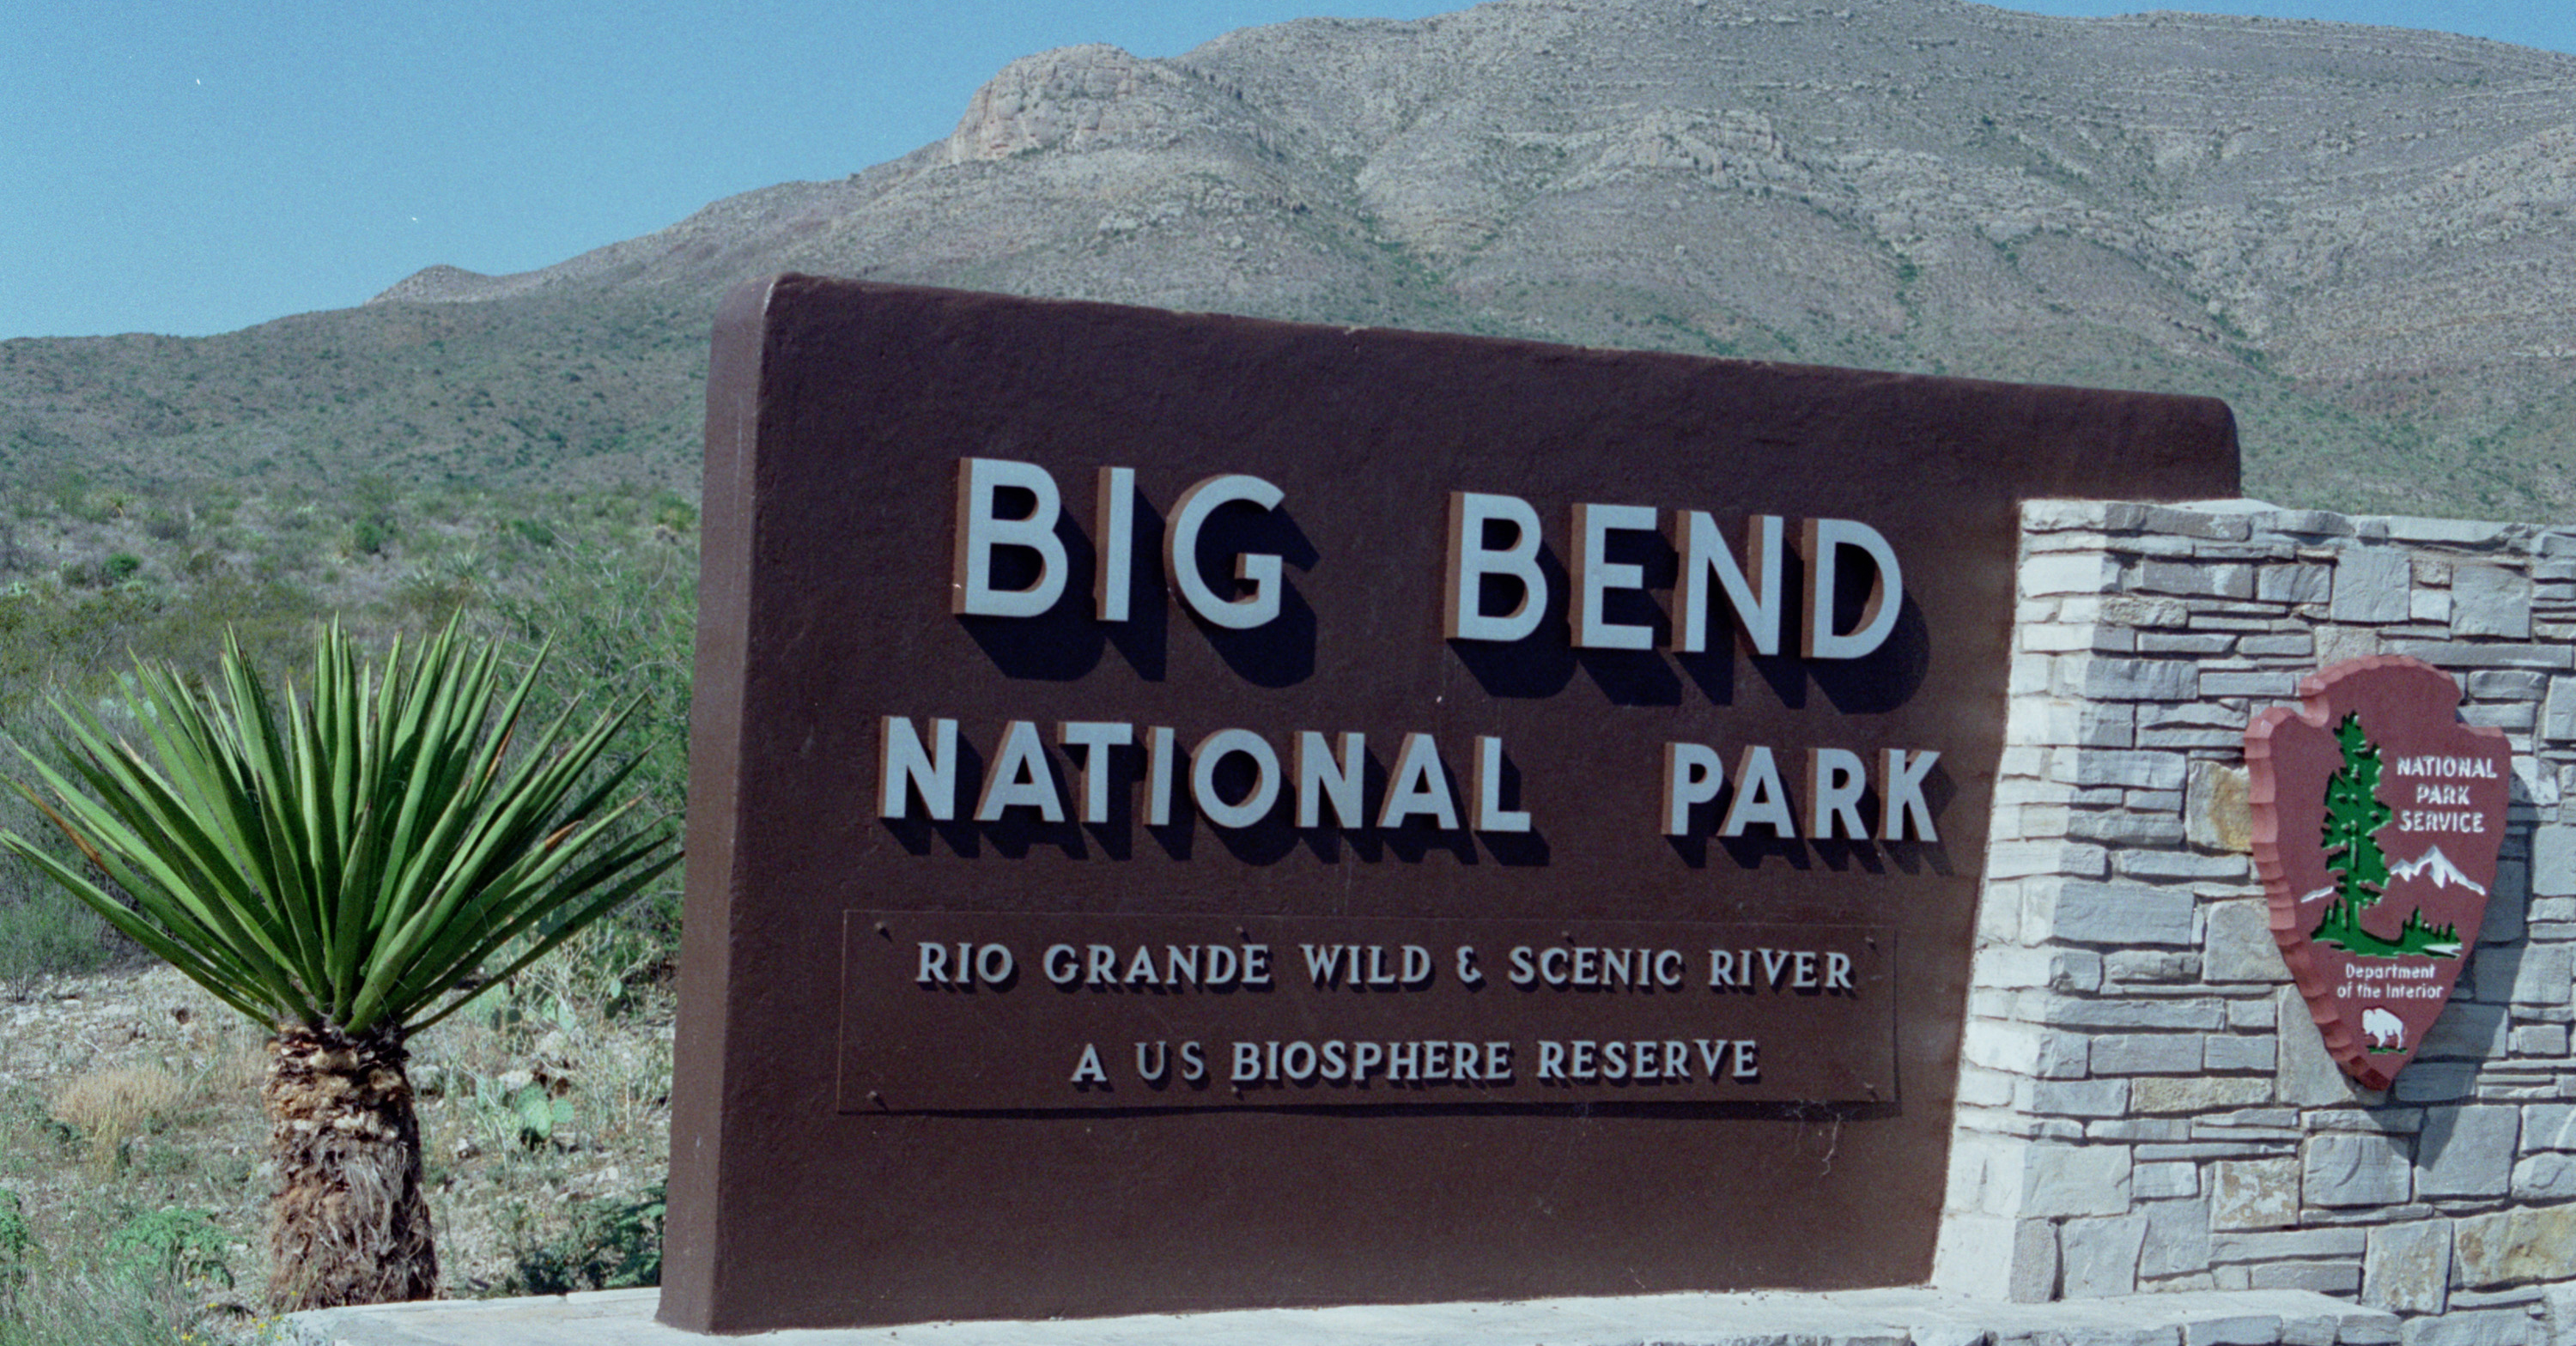 388939 08: Big Bend National Park May 7, 2001 where fossil neck bone remains were discovered in south Brewster County, Texas. The fossils, each weighing over 1000 pounds, were found in 1999 in the Javalina formation which was deposited about 66-74 million years ago. The fossilized remains, those of a saurapod-type dinosaur, may represent the largest dinosaur fossil ever found in Texas and a species new to science. (Photo by Bobbie DeHerrera/Newsmakers)